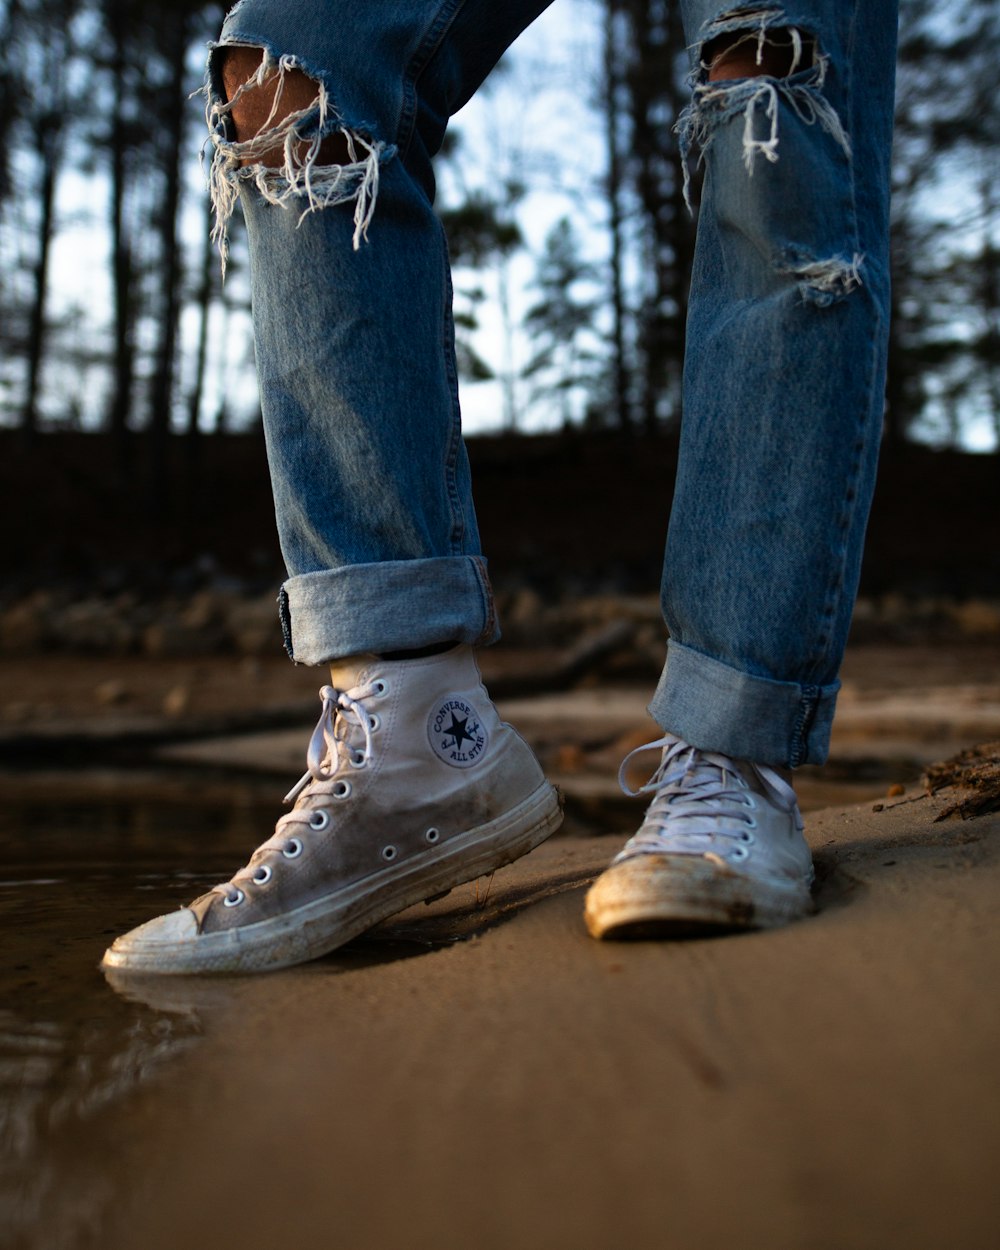 person in blue tattered denim jeans and white Converse sneakers photo –  Free Shoe Image on Unsplash